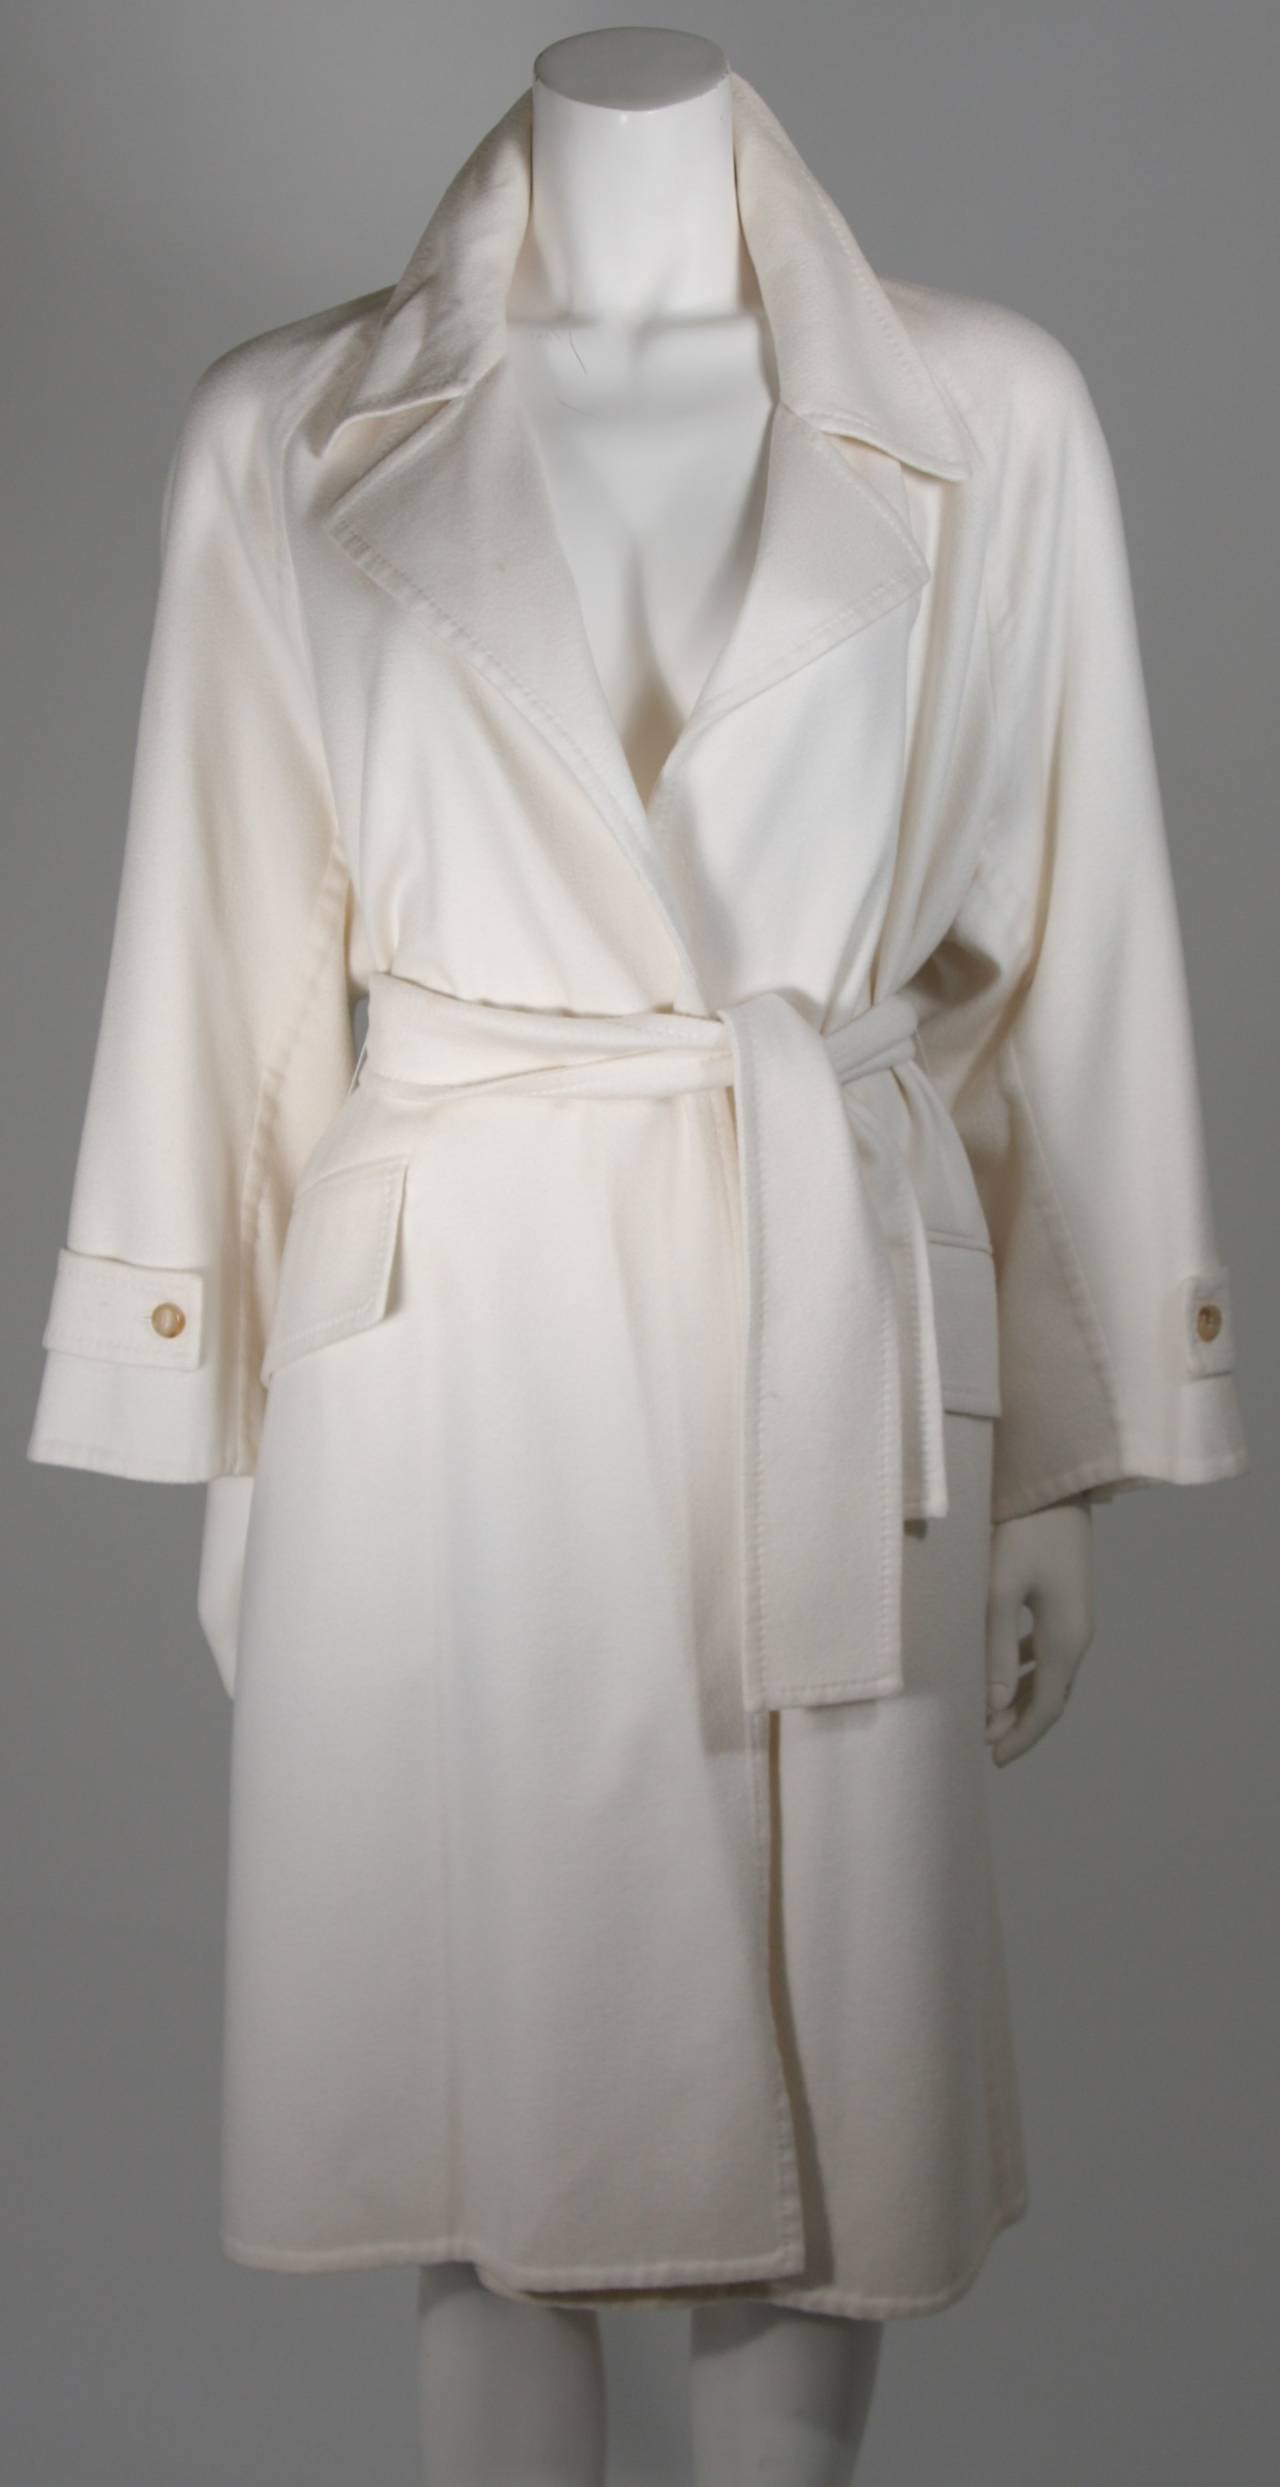 This coat is composed of an ultra supple cashmere in a beautiful brilliant shade of white. There are front pocket details and a belt closure. Excellent condition with original tag. Made in France.

Please feel to contact us with any inquiries you